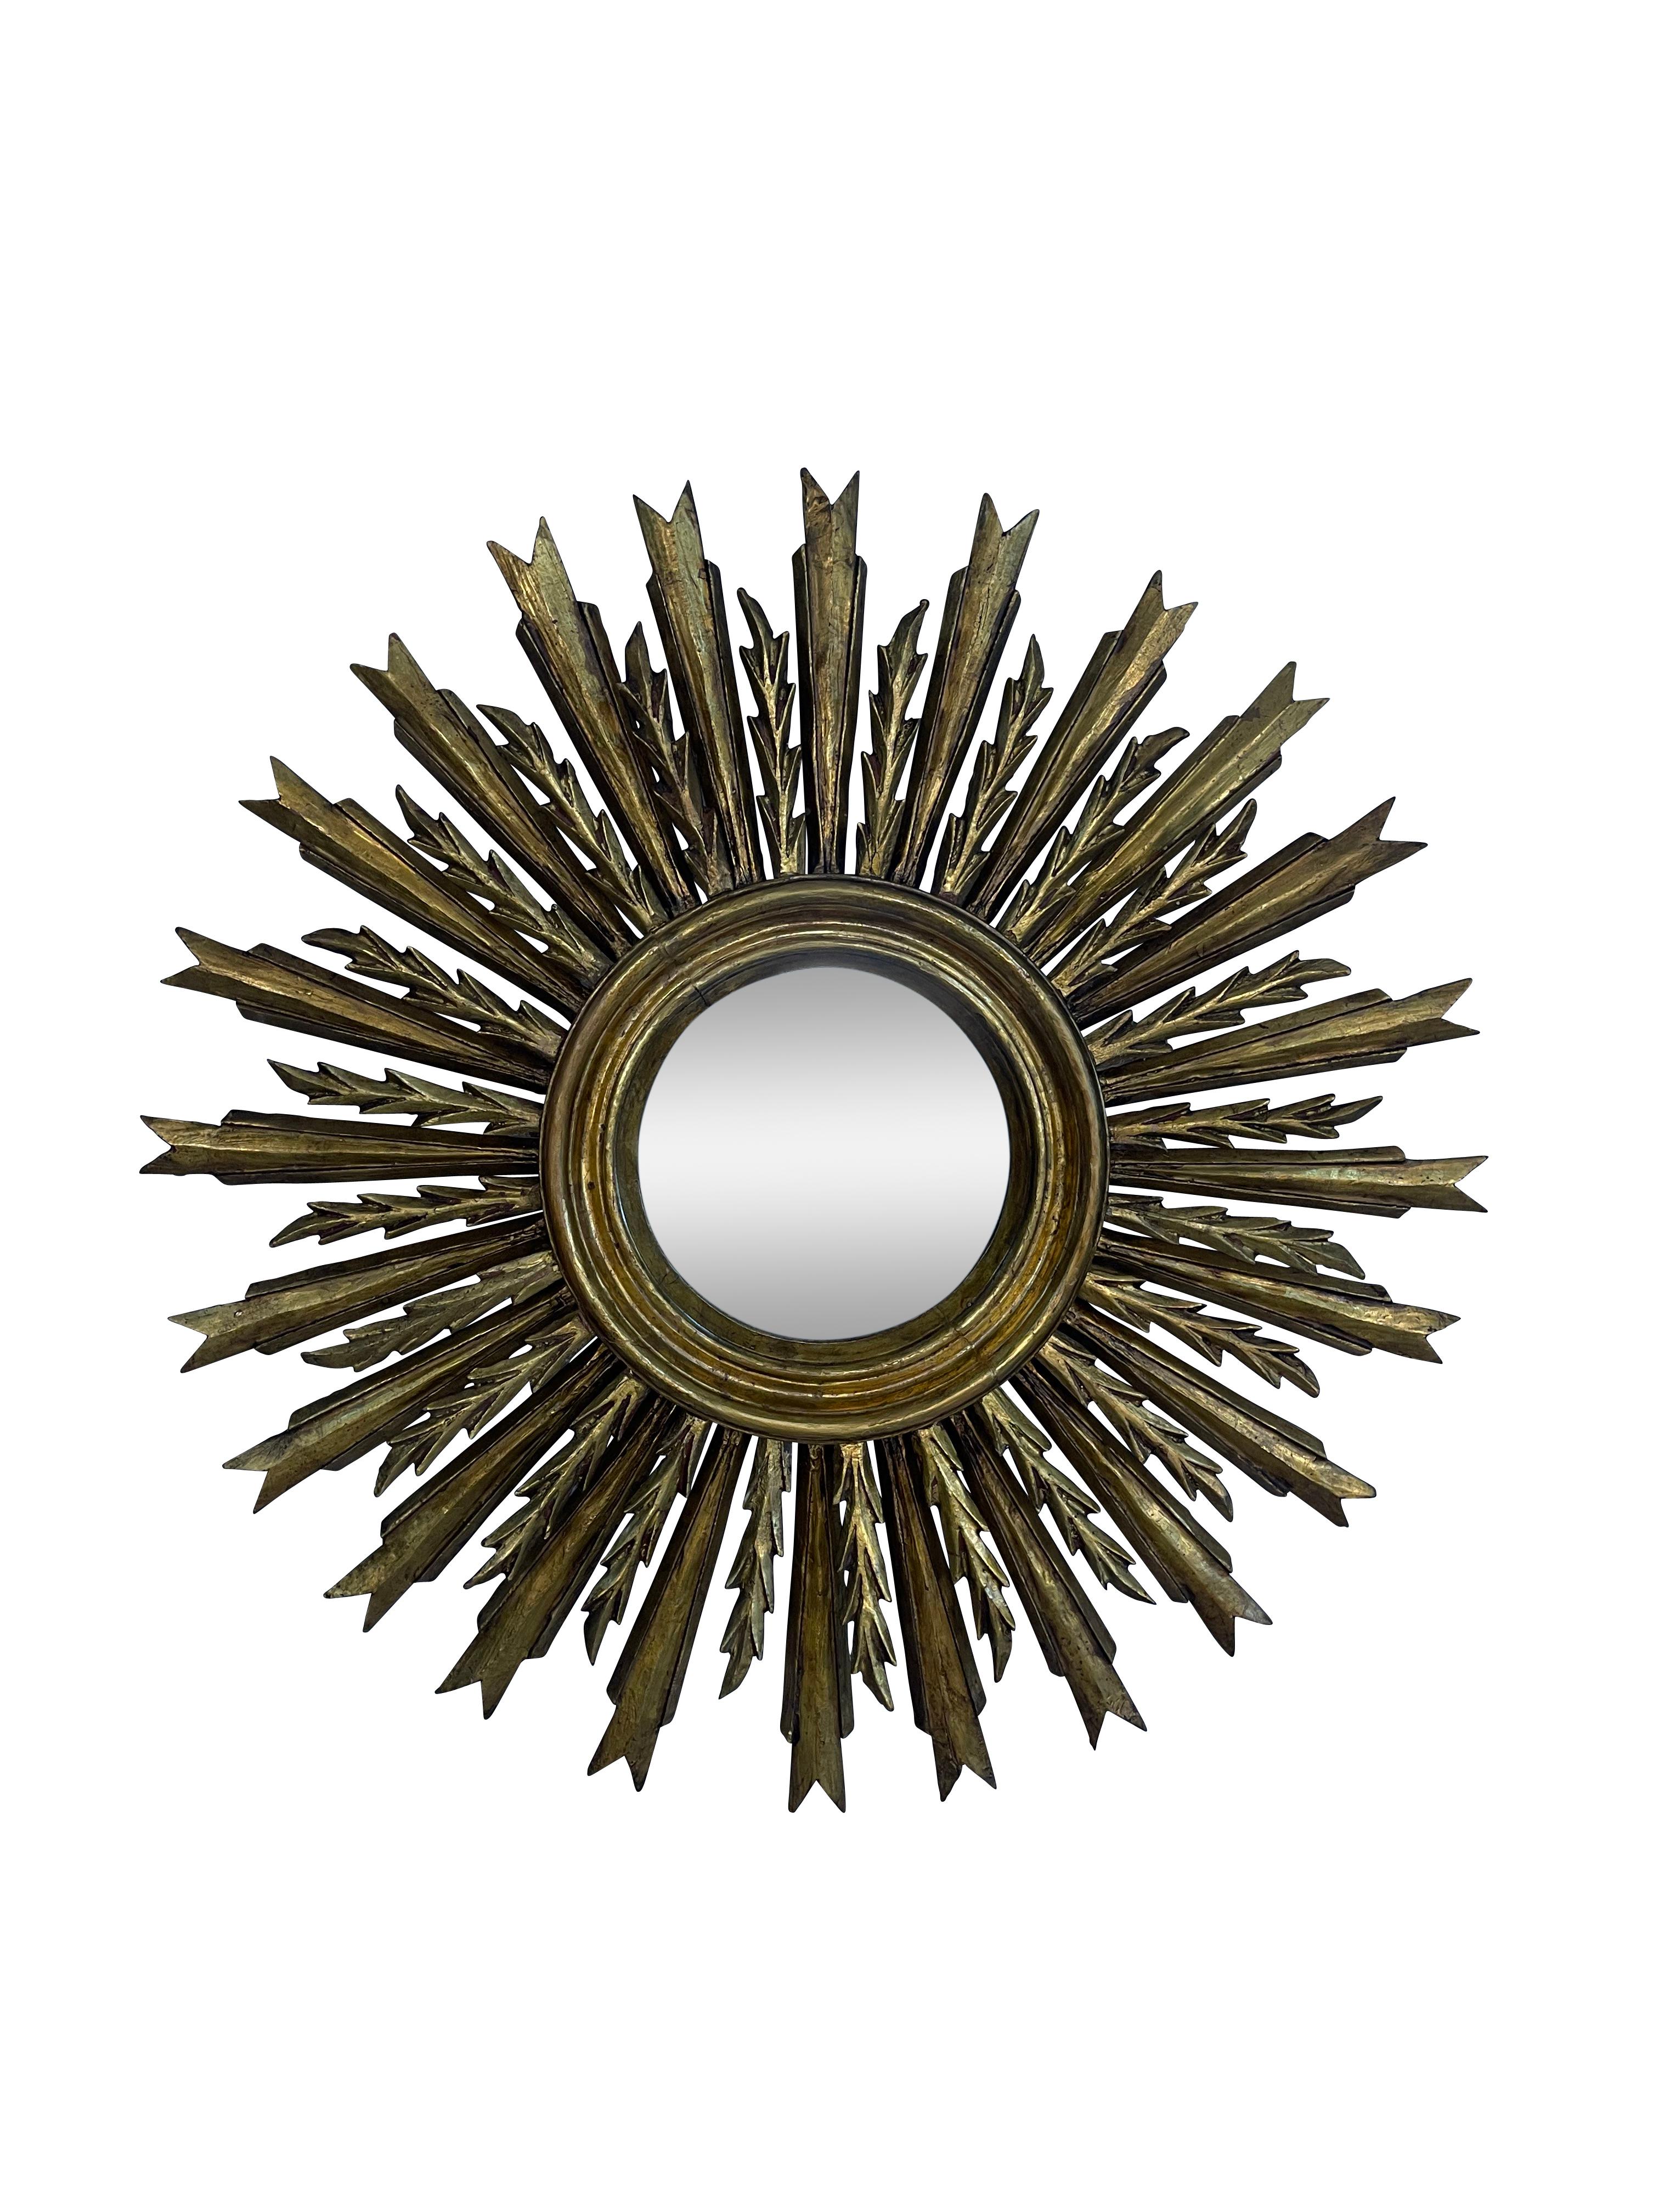 20th Century Antique Carved and Giltwood Mid Century French Starburst Mirror For Sale